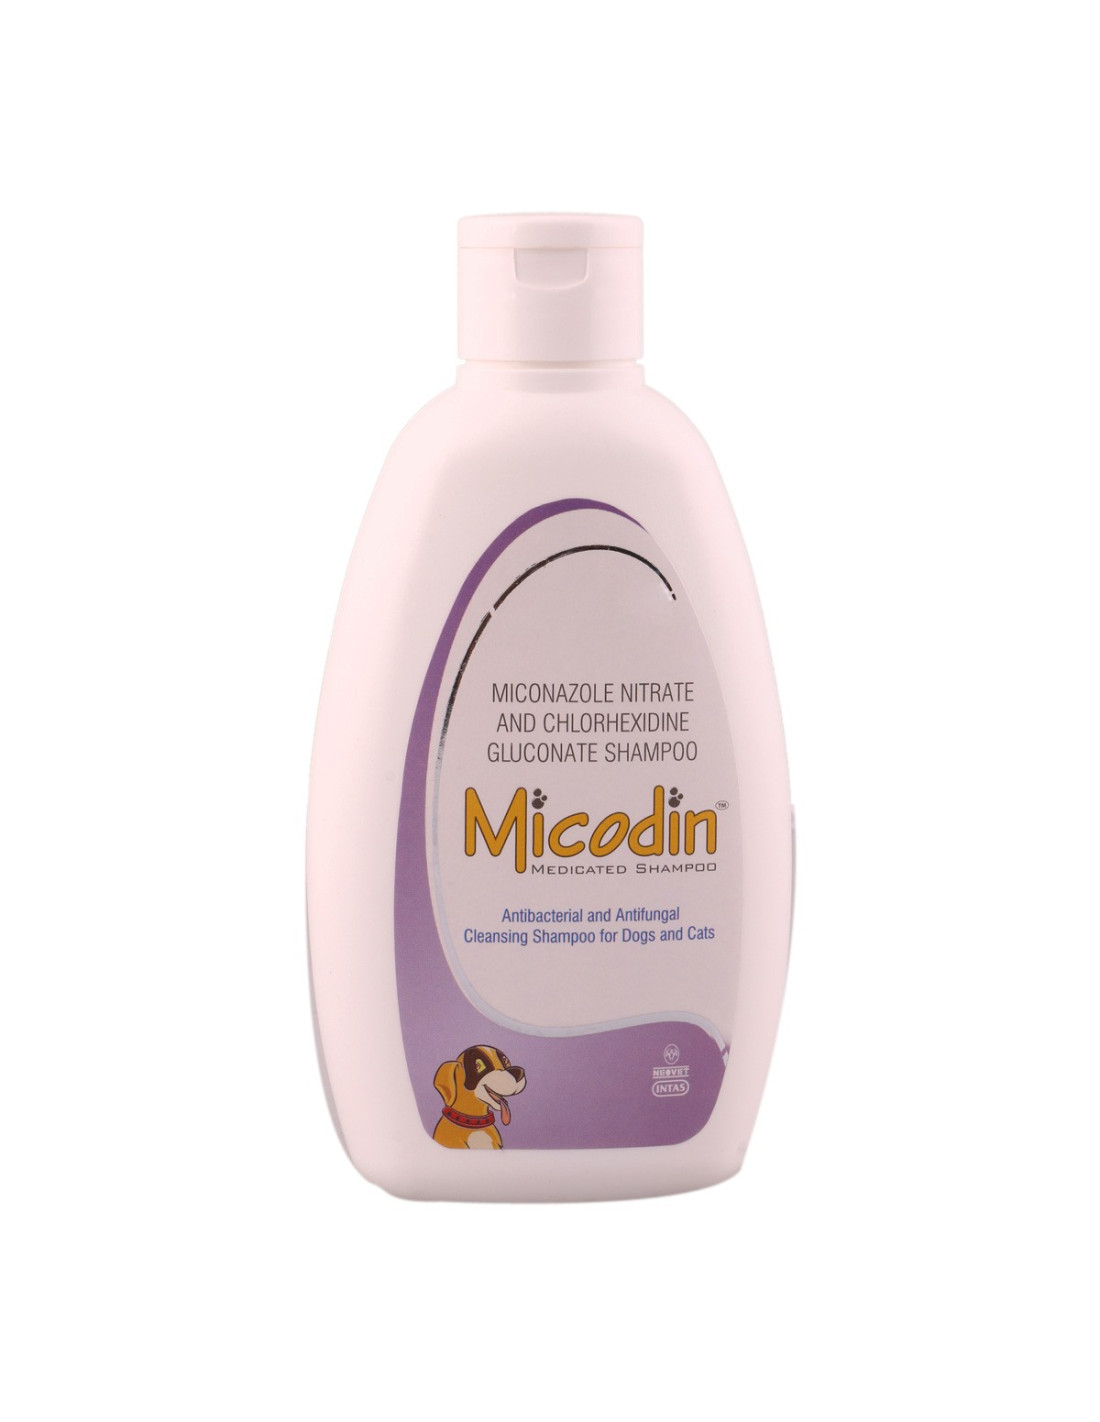 Intas Micodin Dog Shampoo 100 Ml At Very Lowest Price Pack Extra Offer